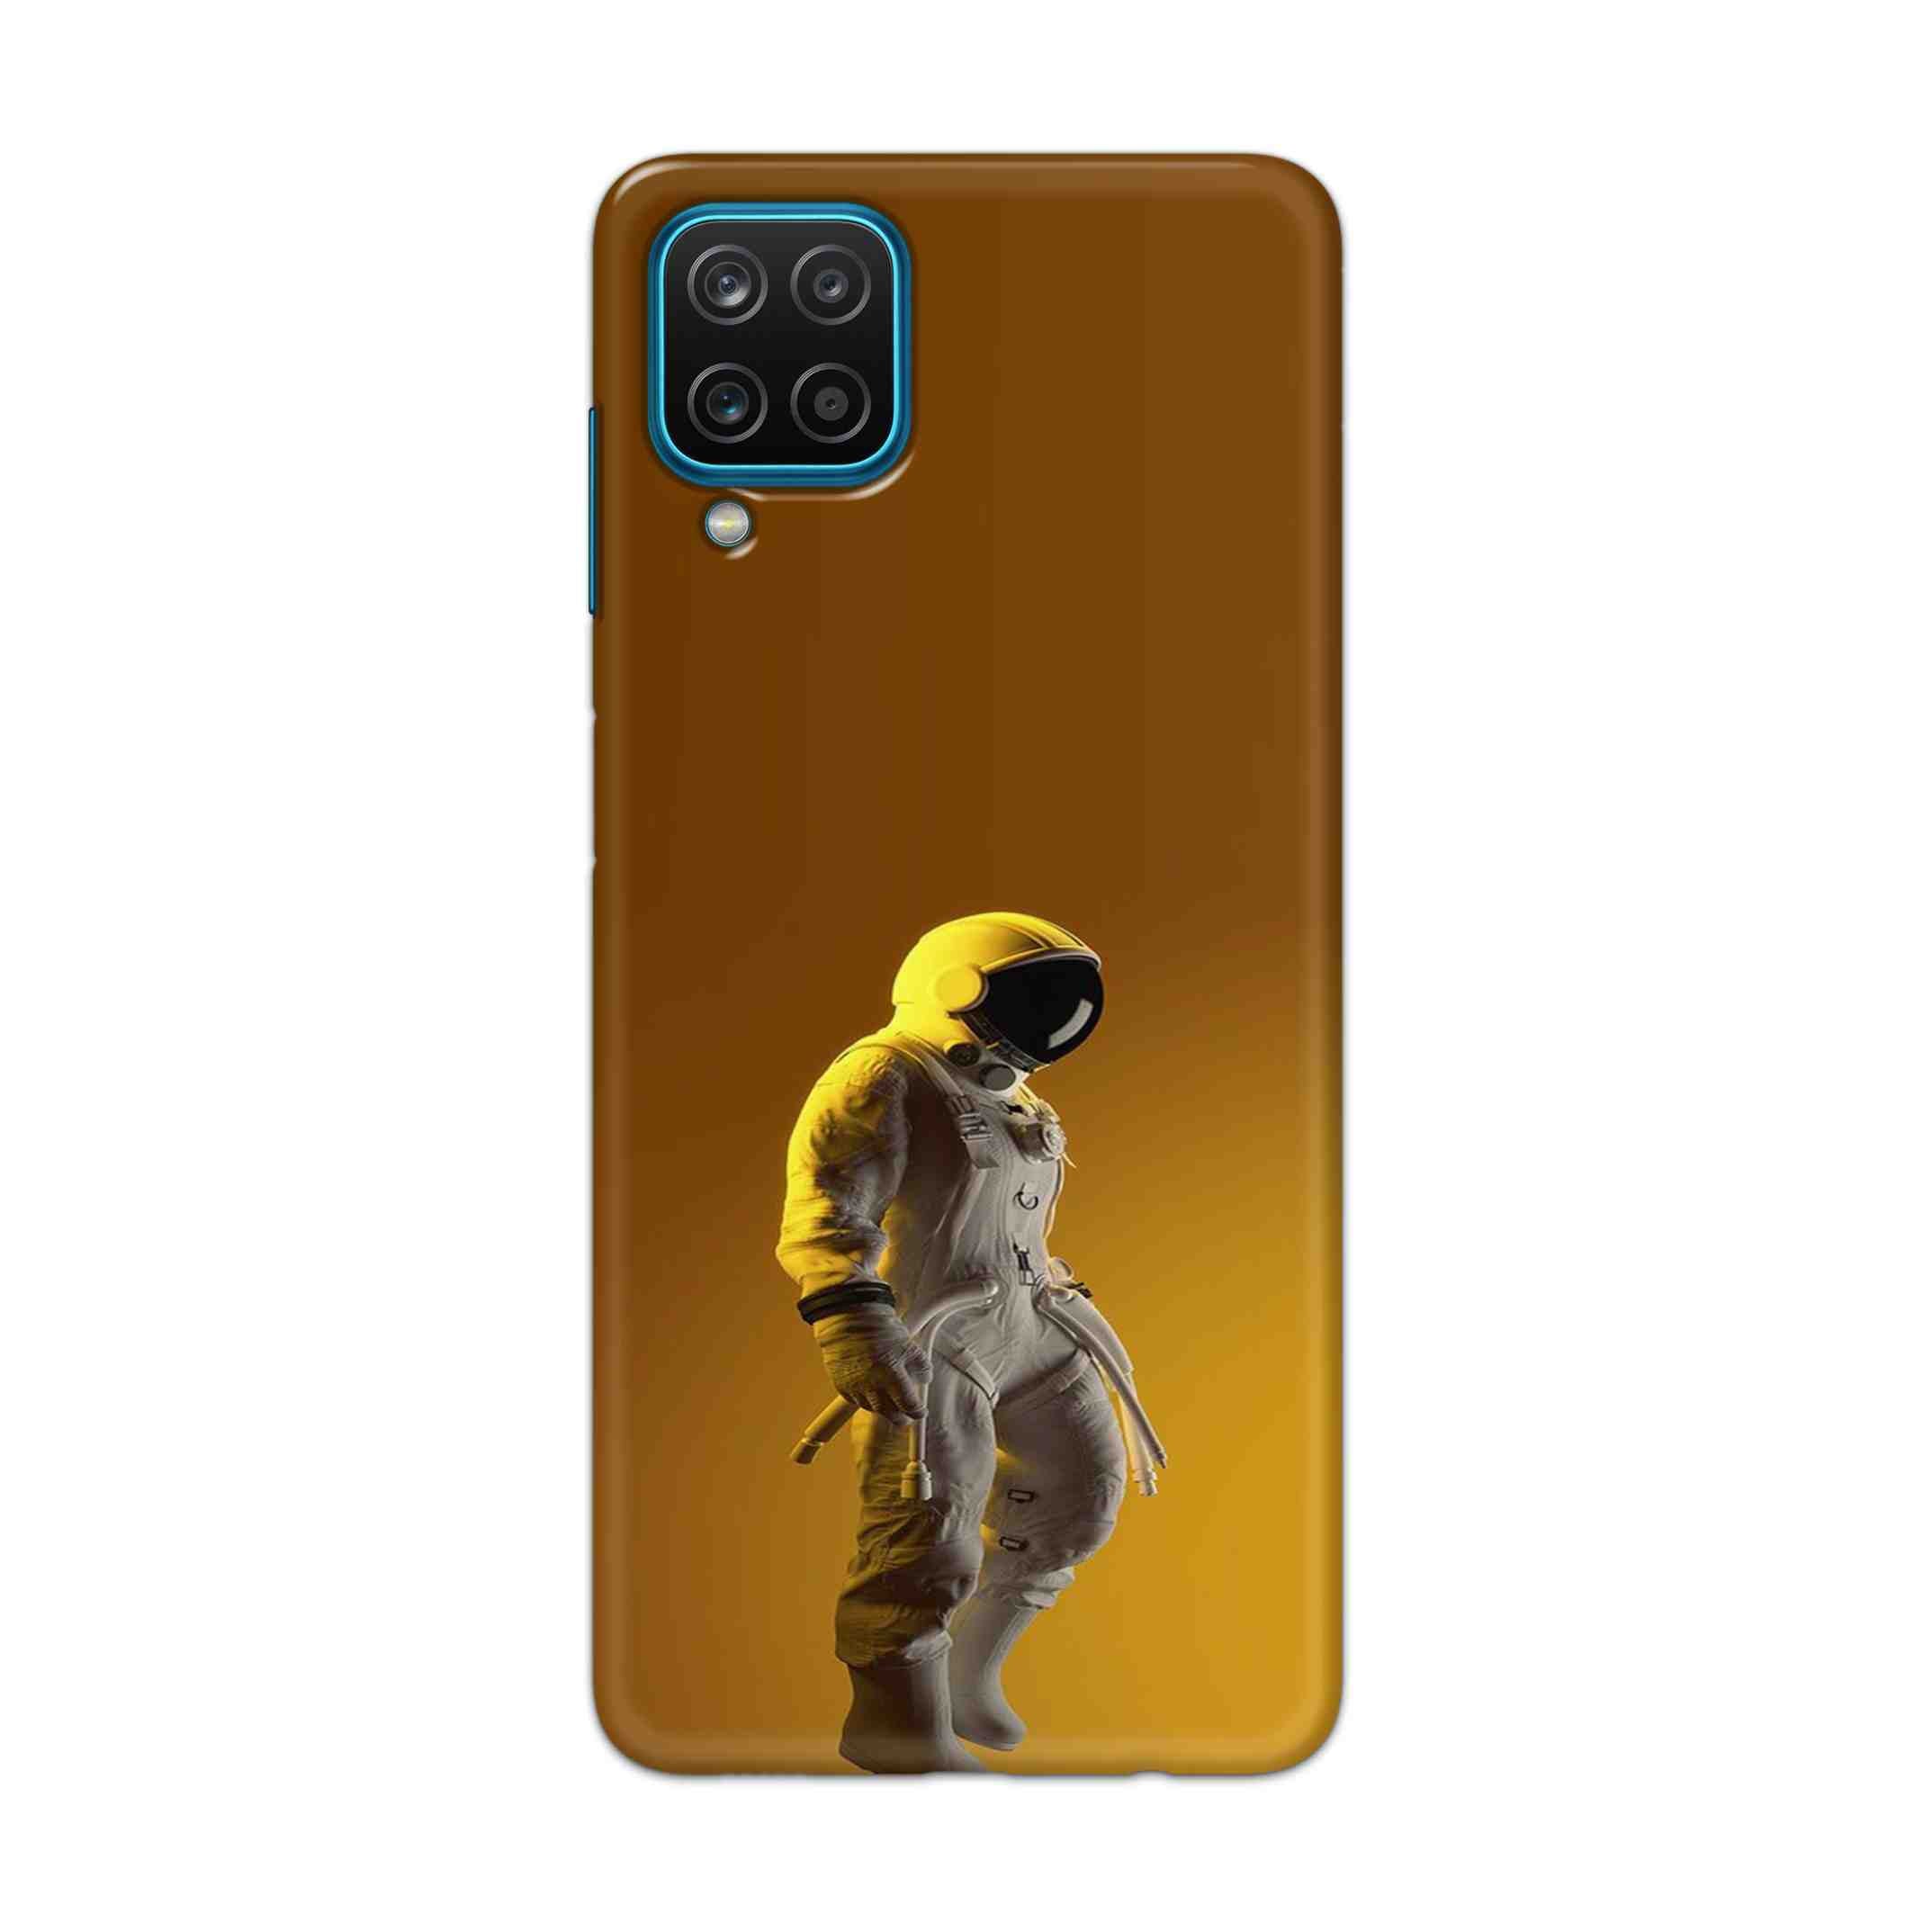 Buy Yellow Astronaut Hard Back Mobile Phone Case Cover For Samsung Galaxy A12 Online